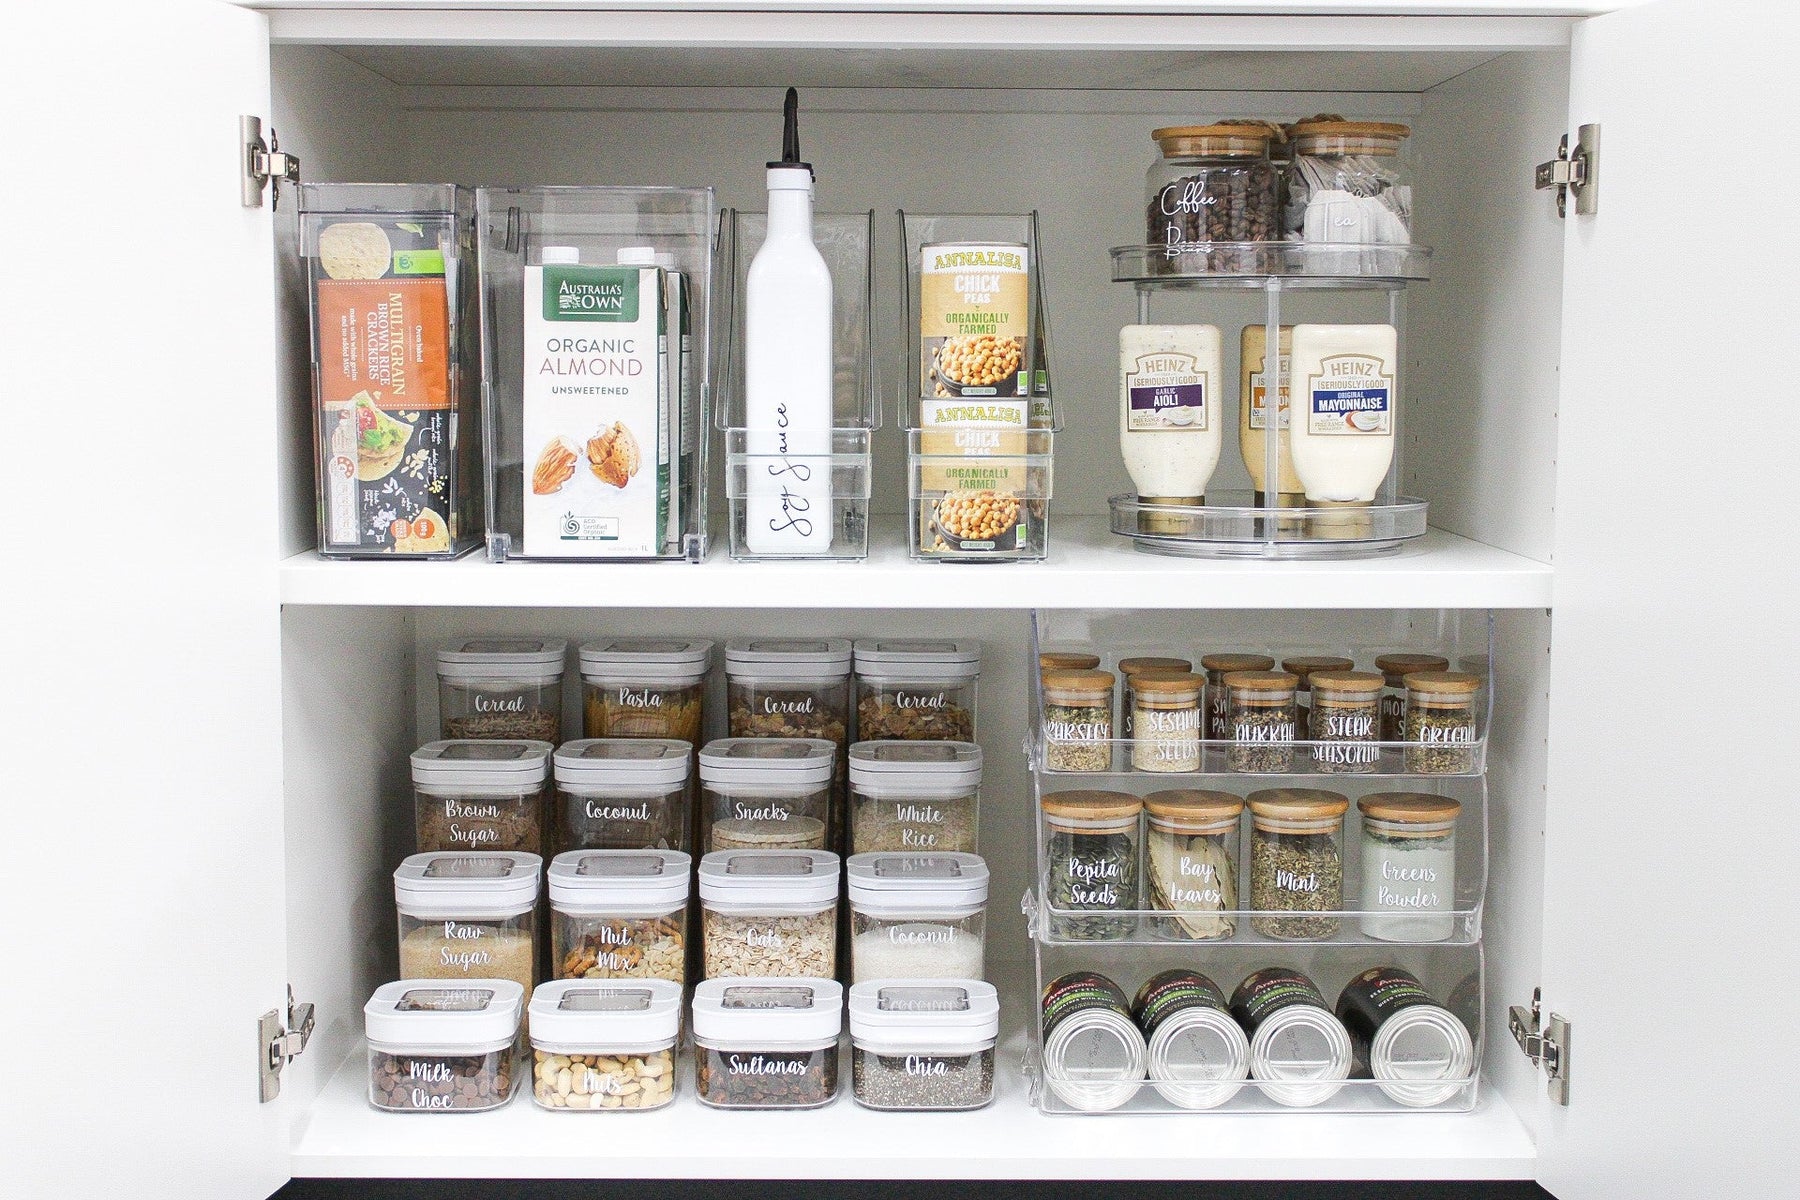 Conquering the Tiny Pantry: Organisation Tips for Small Spaces